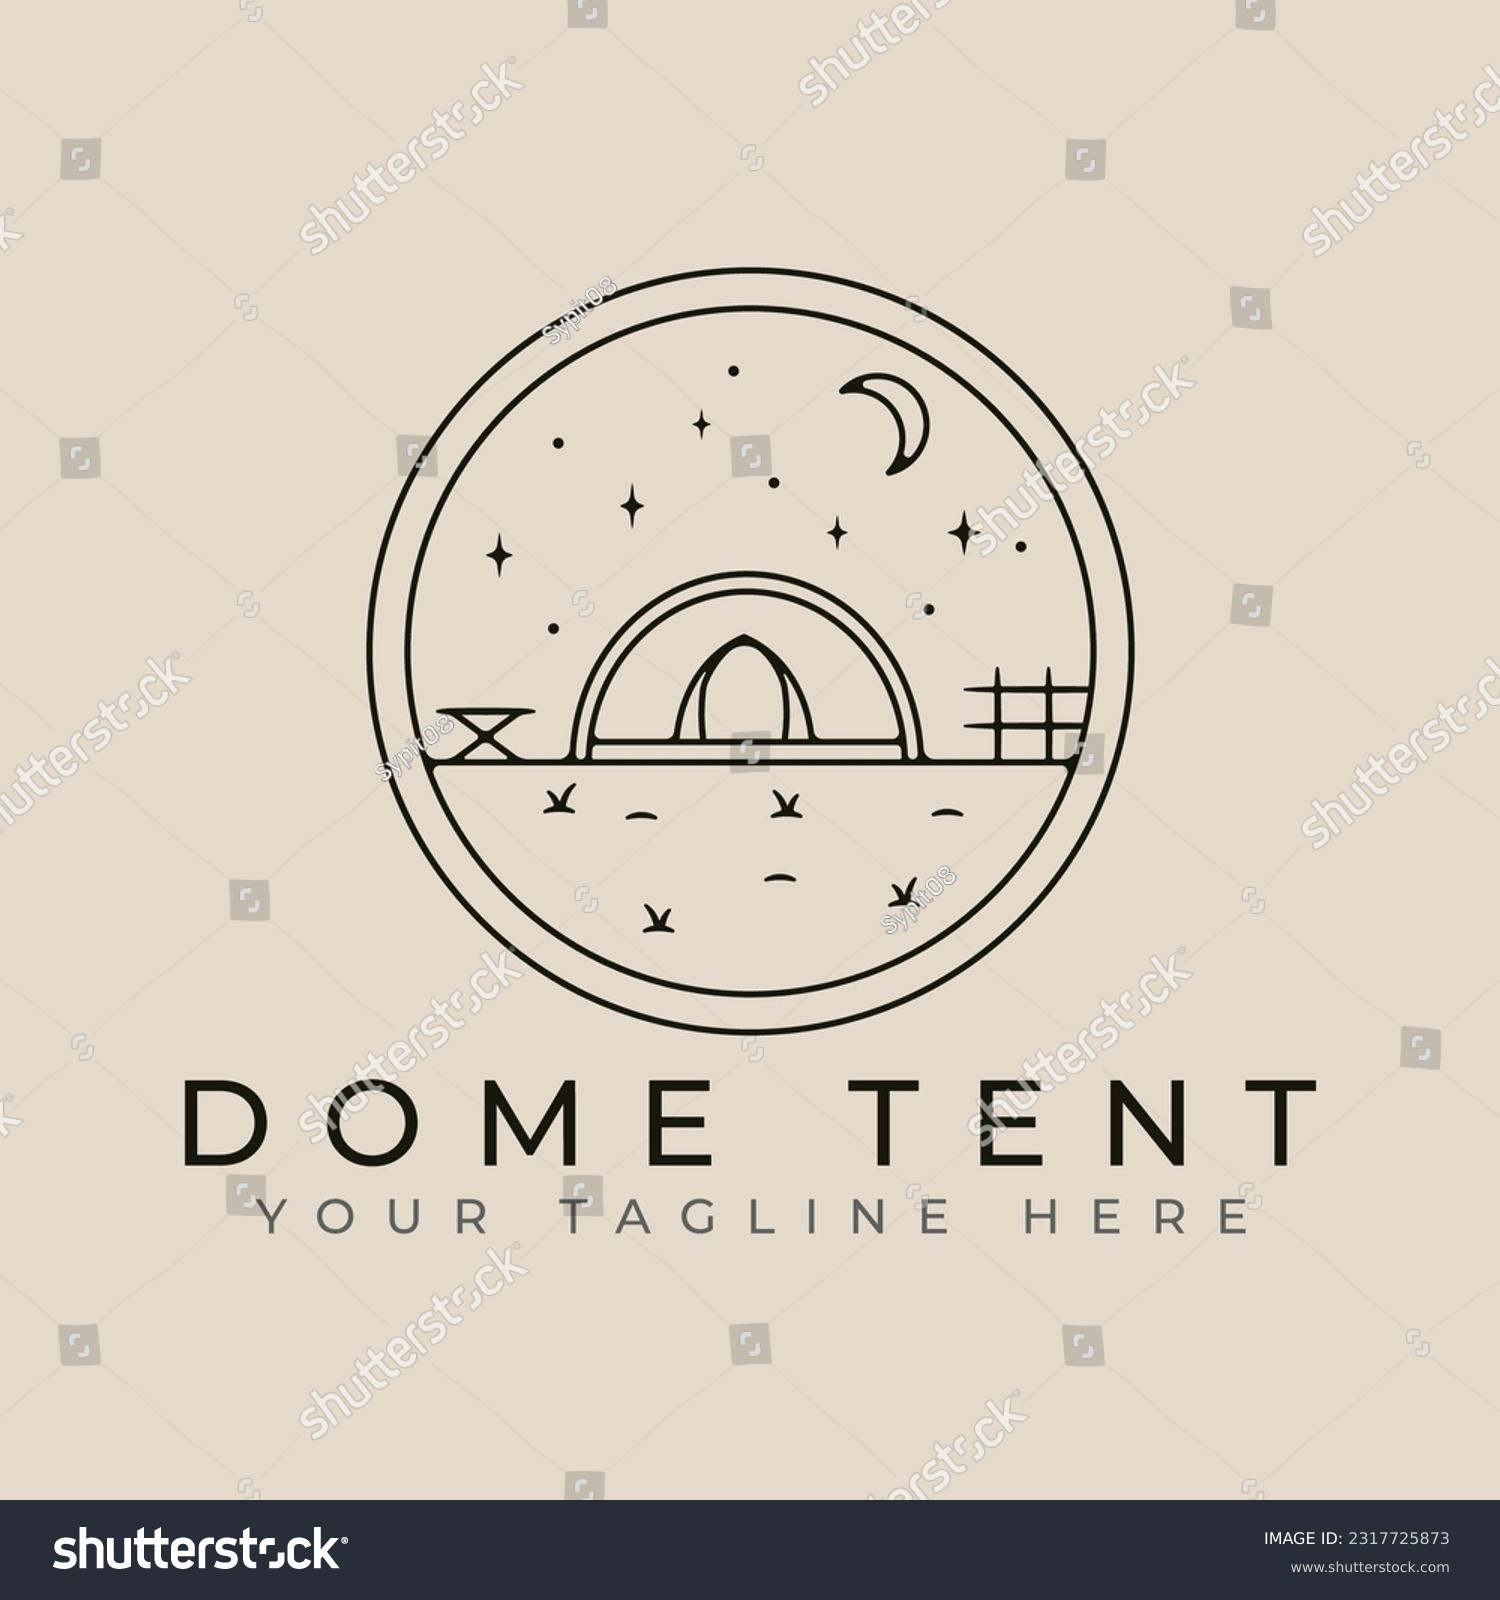 SVG of dome tent outdoor line art logo design with moon and star minimalist style logo vector illustration design svg